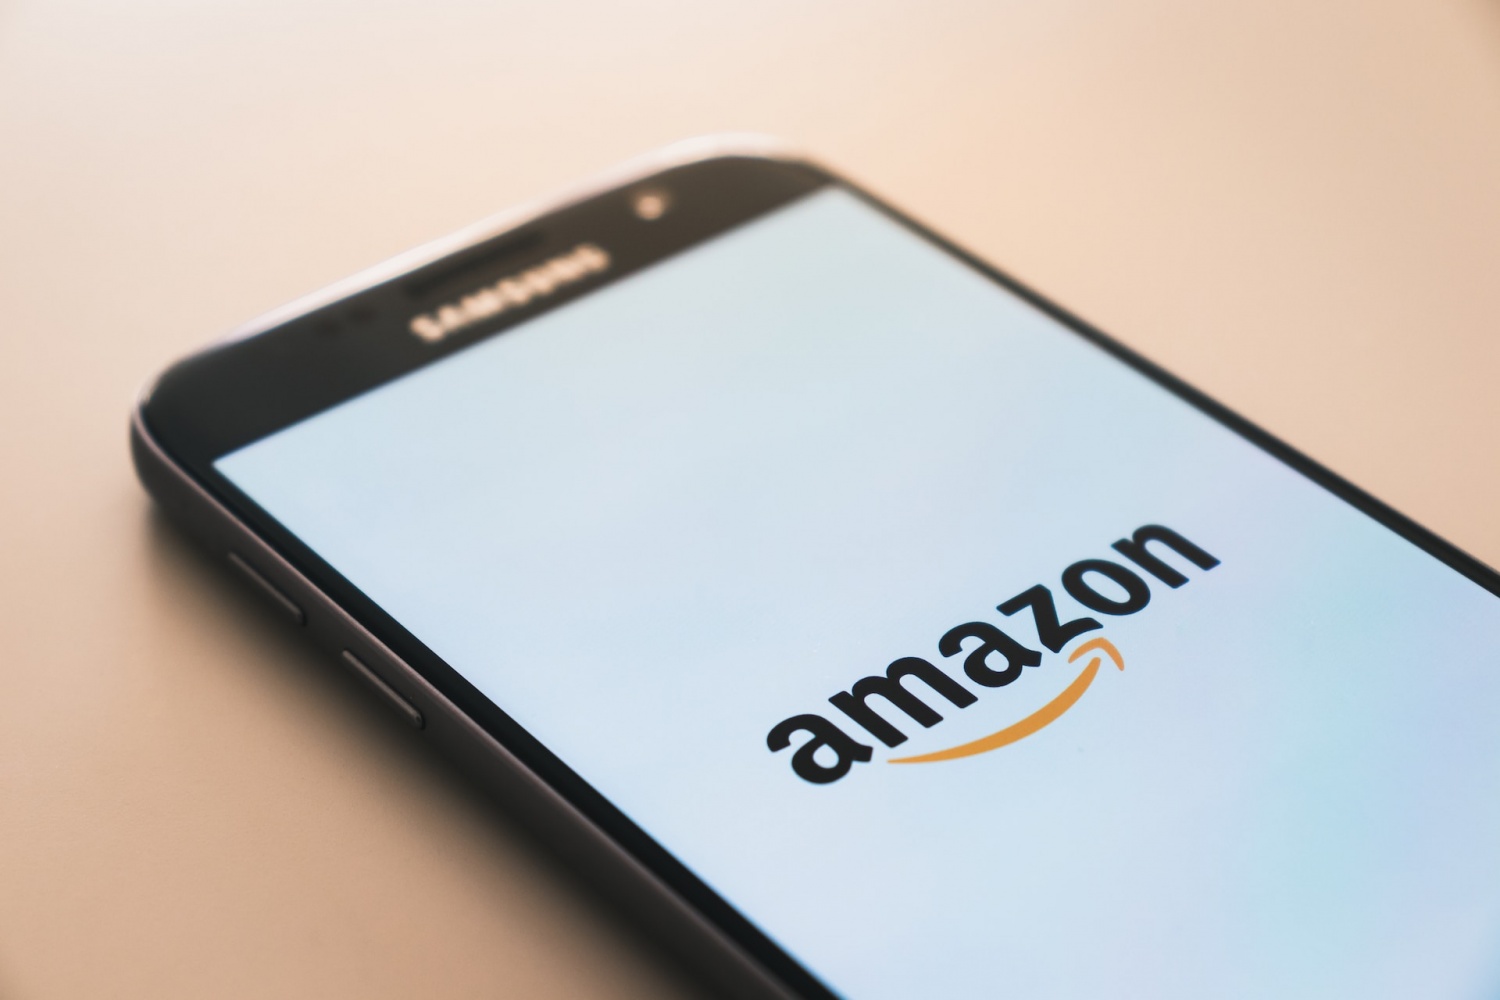 Amazon Shopping Return: Here's What You Need to Know to Take Advantage of Black Friday Deals